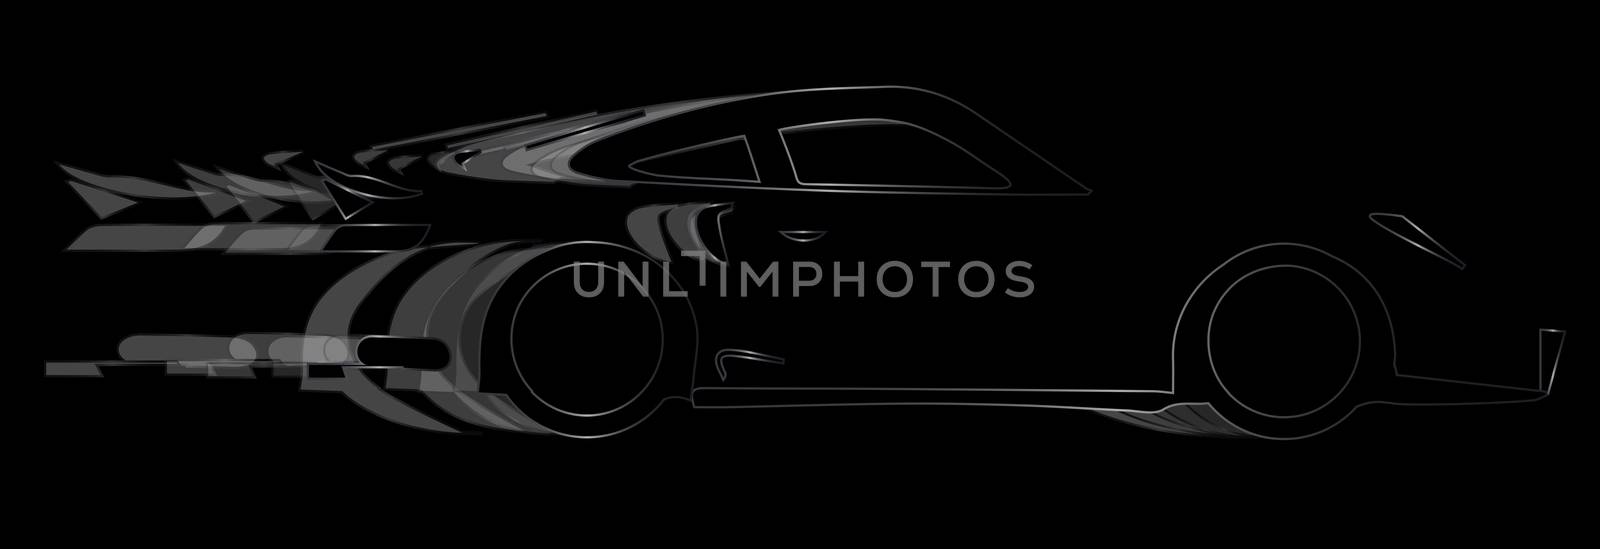 A fast car in silhouette with speed blur over black